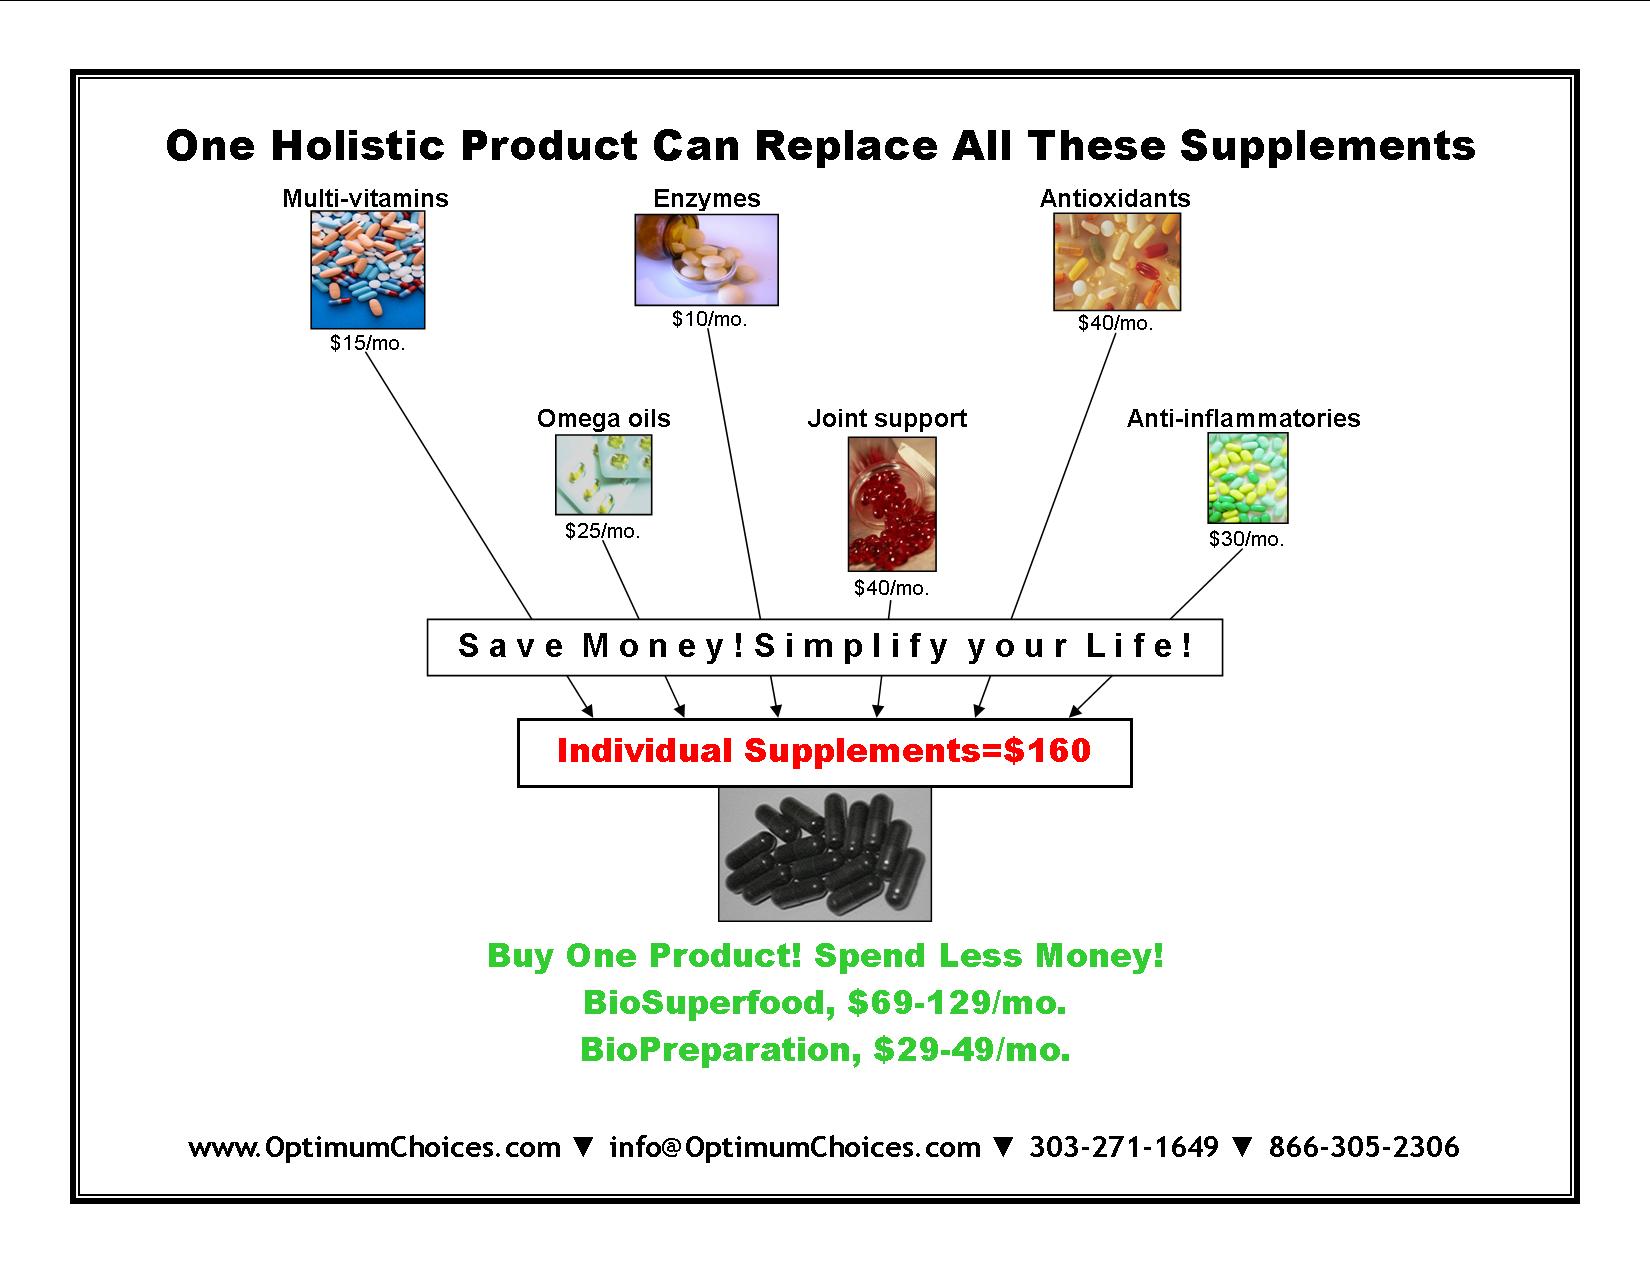 Save money on supplements